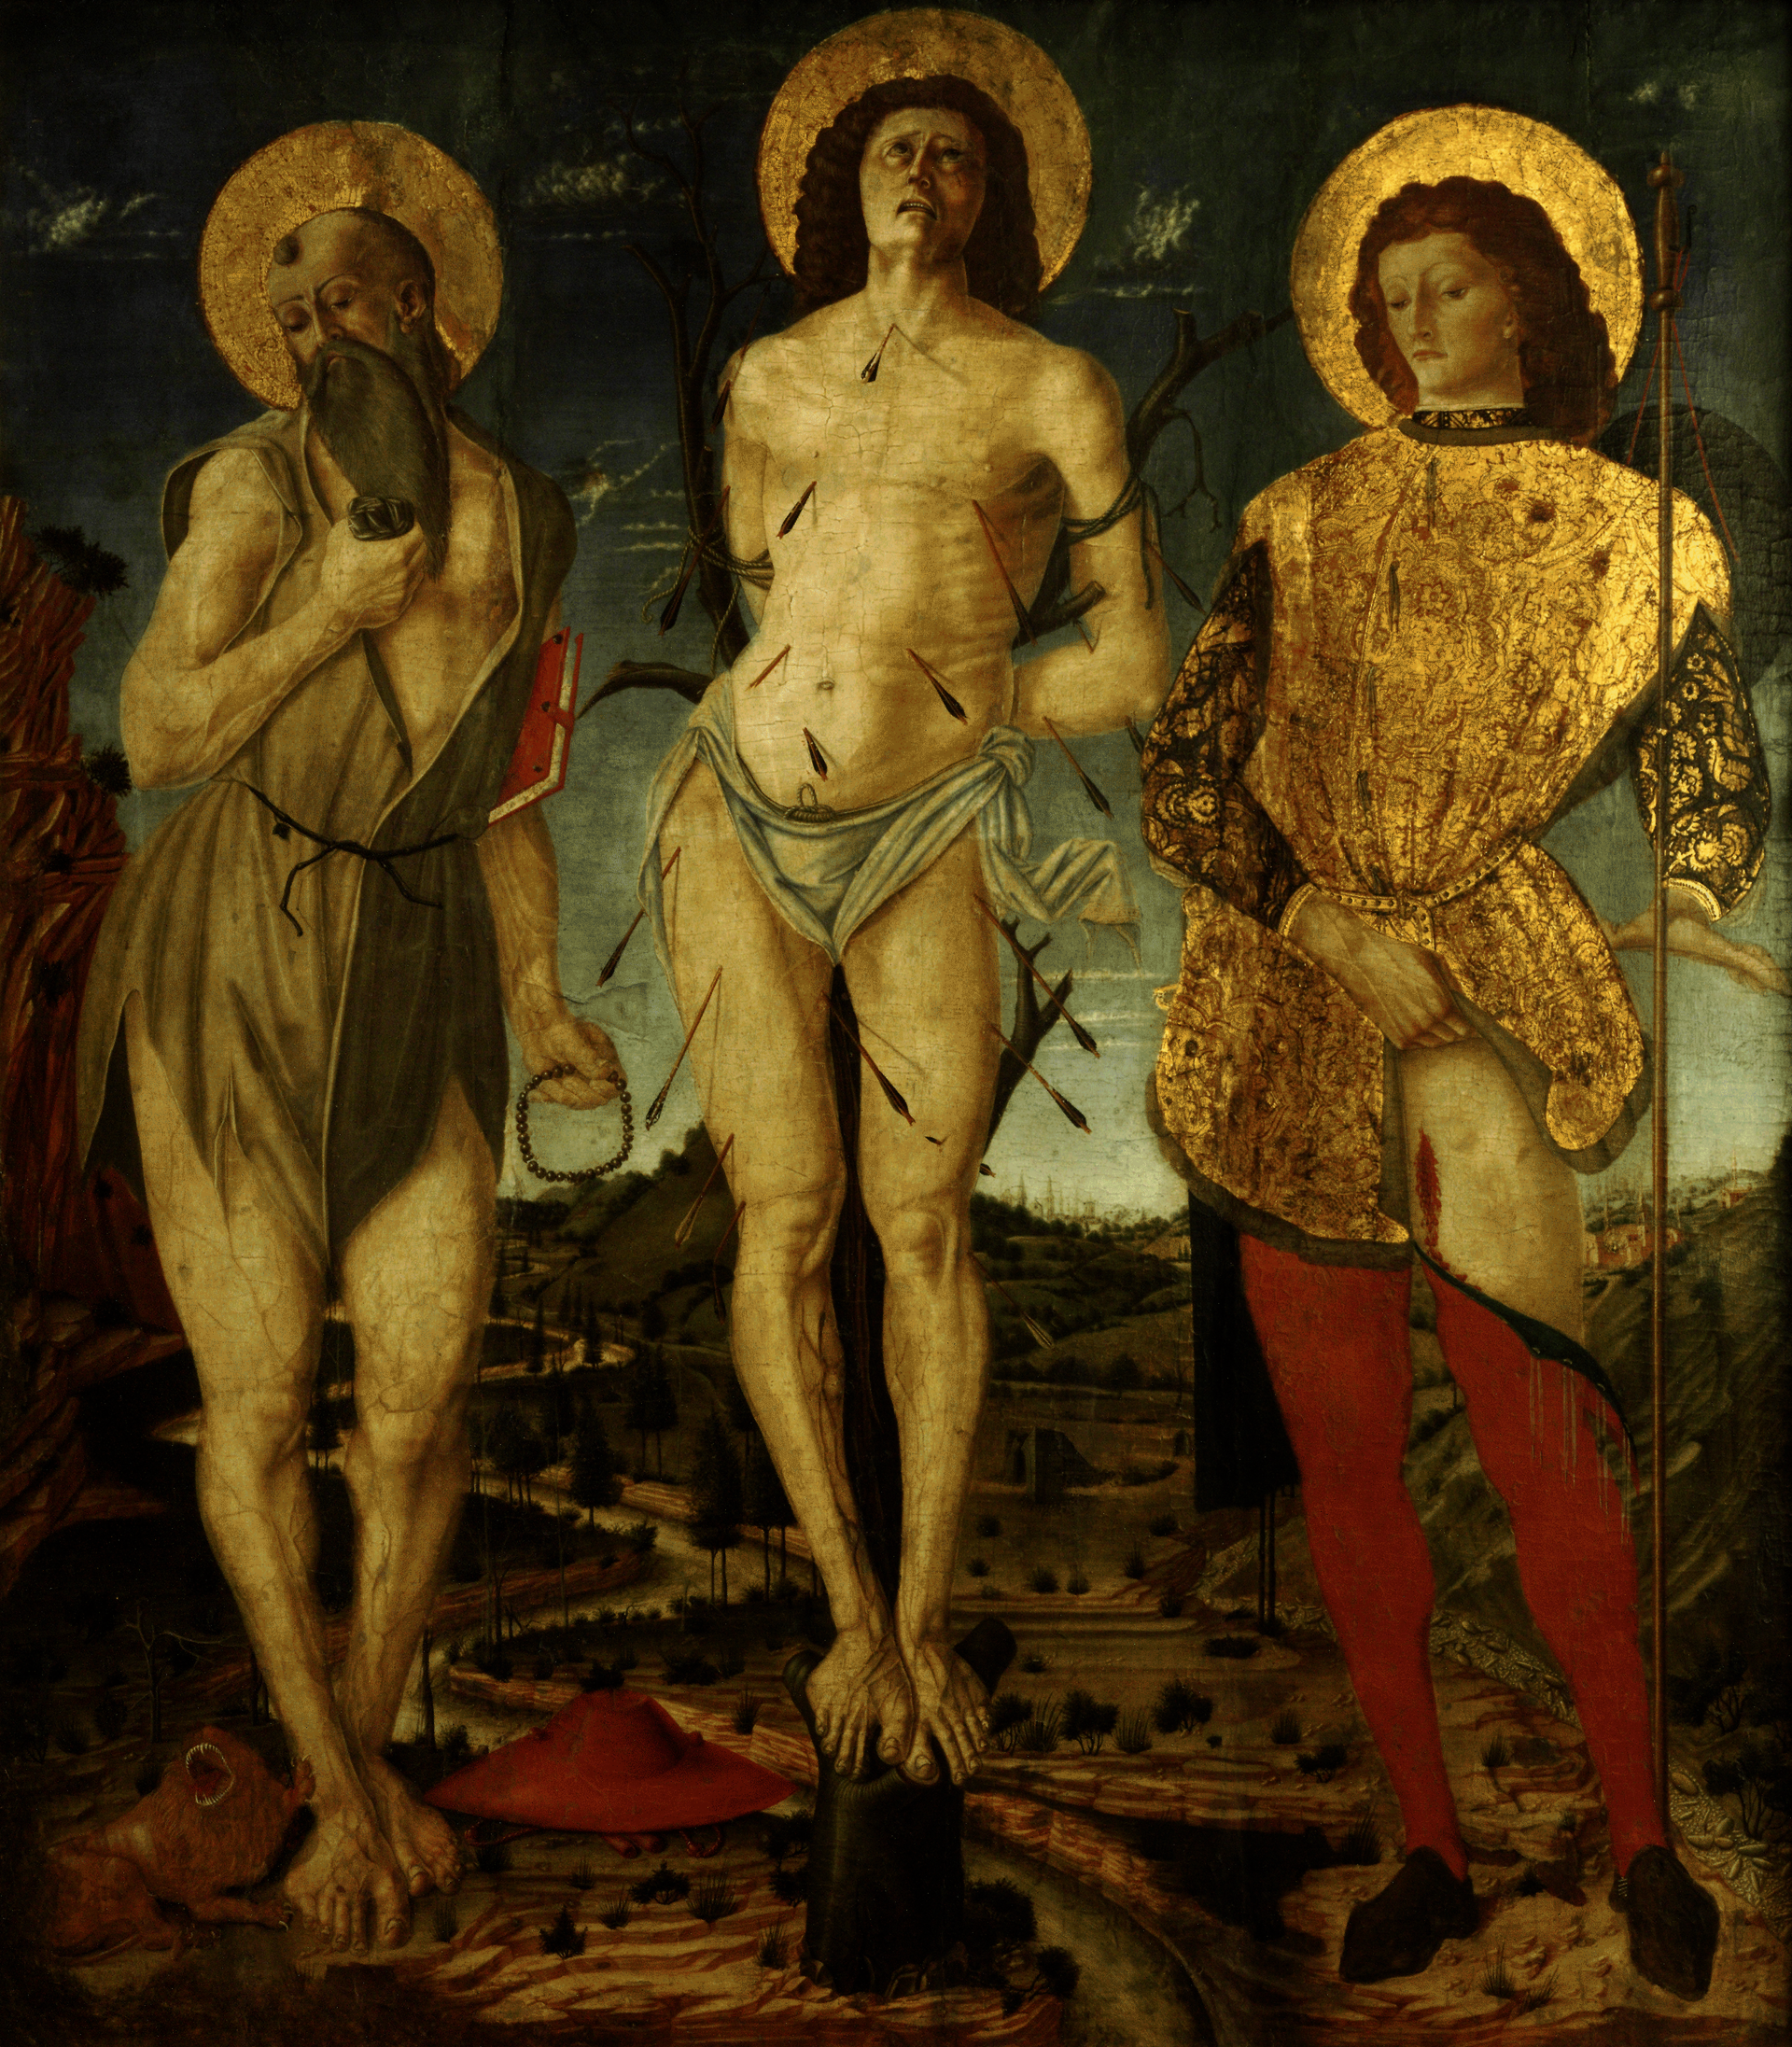 Painting in rich tones of three gold-haloed figures. From left: old man wearing rags, nearly naked man pierced with arrows, young man wearing fancy clothing displays his injured thigh.